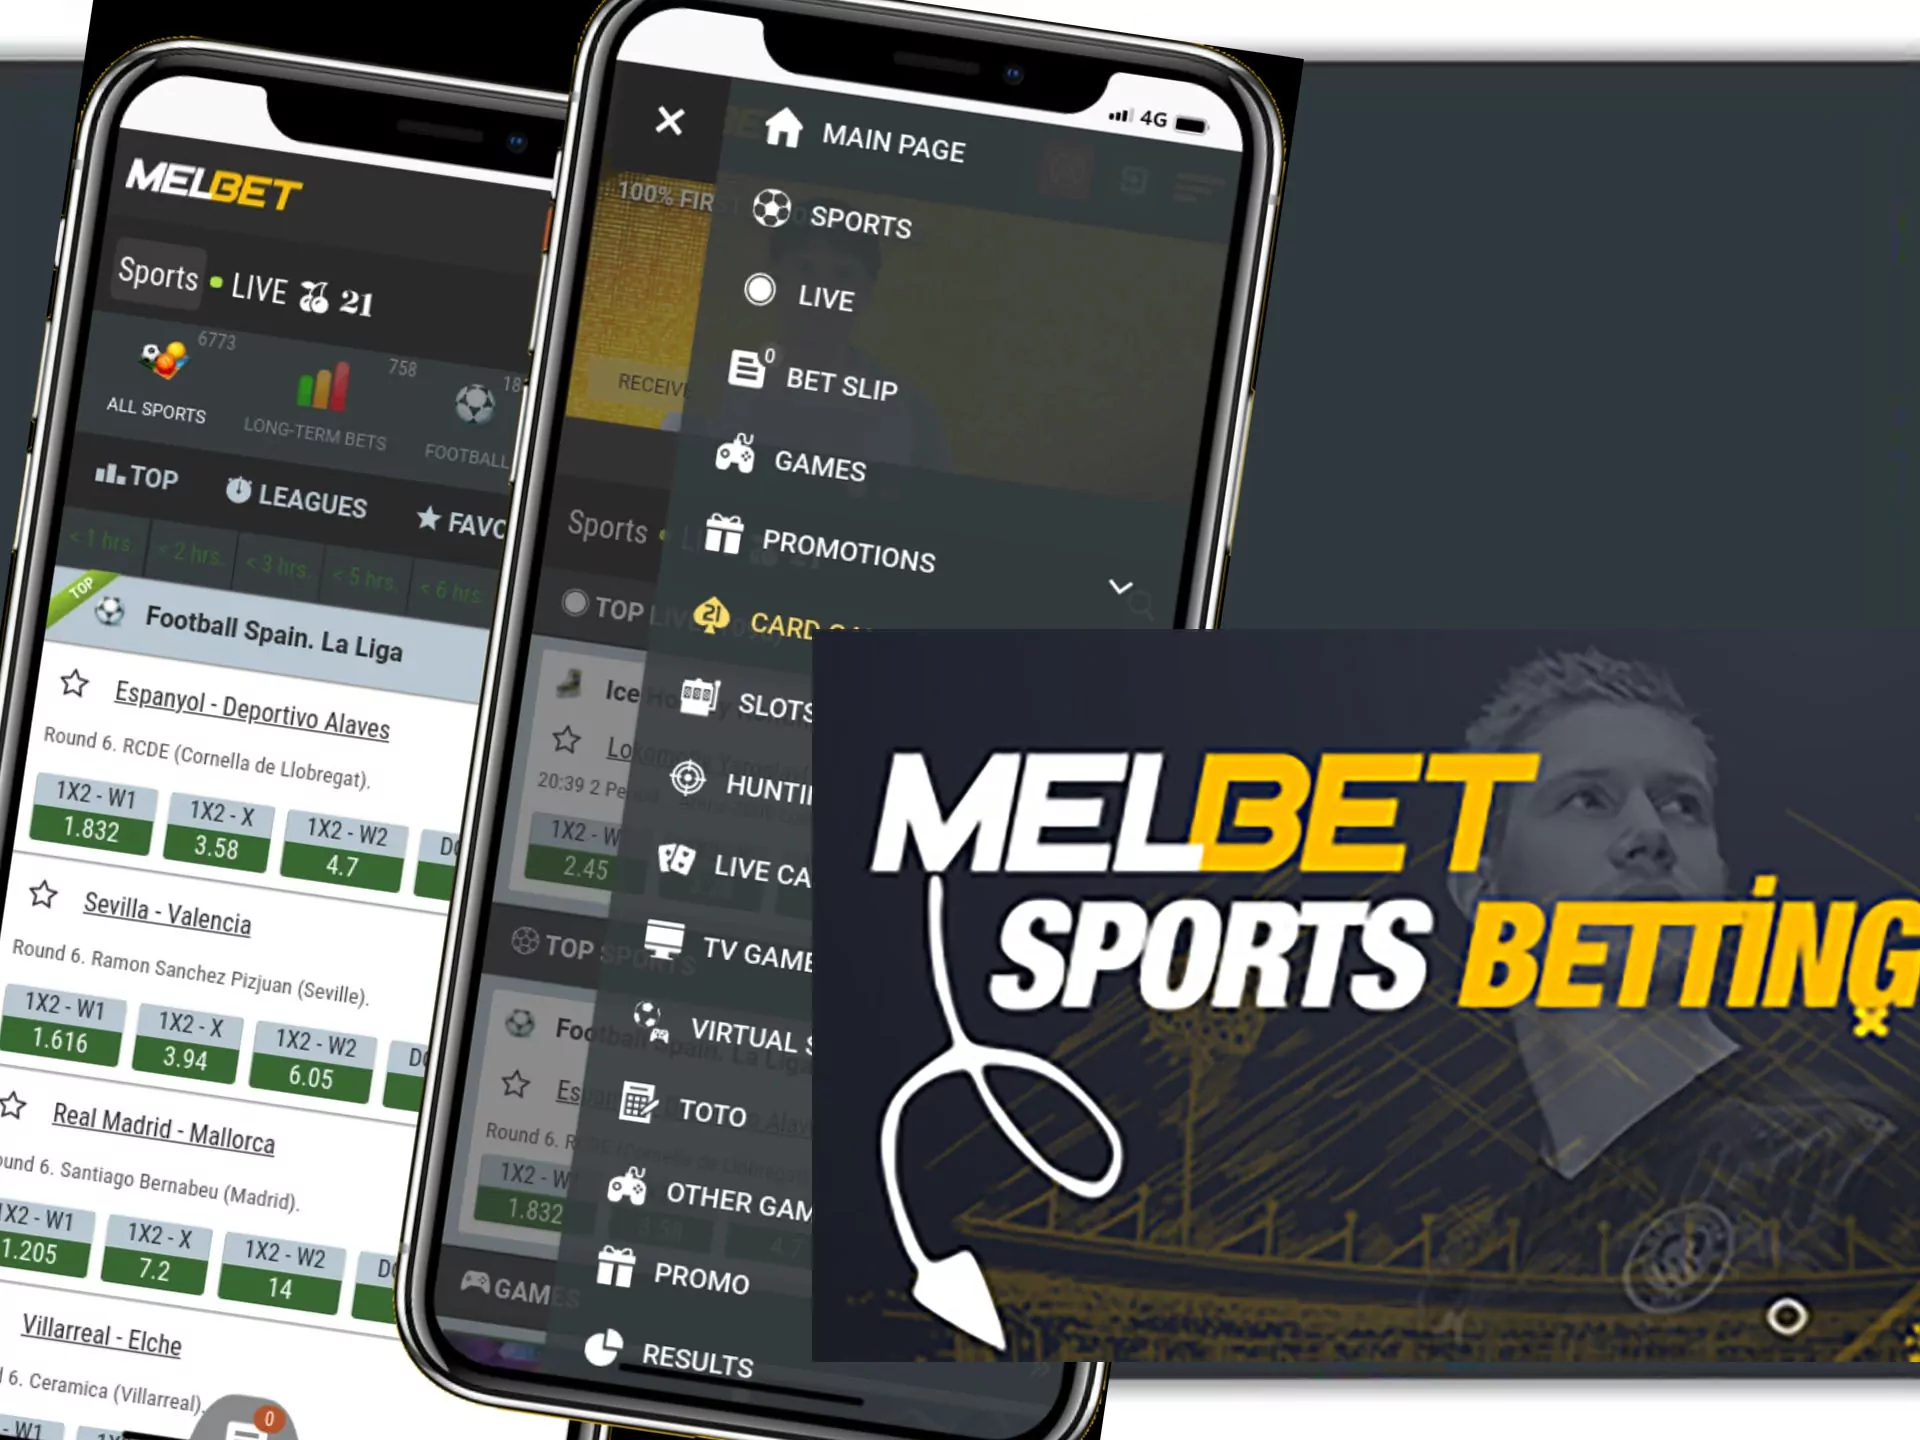 Sports betting in the melbet.